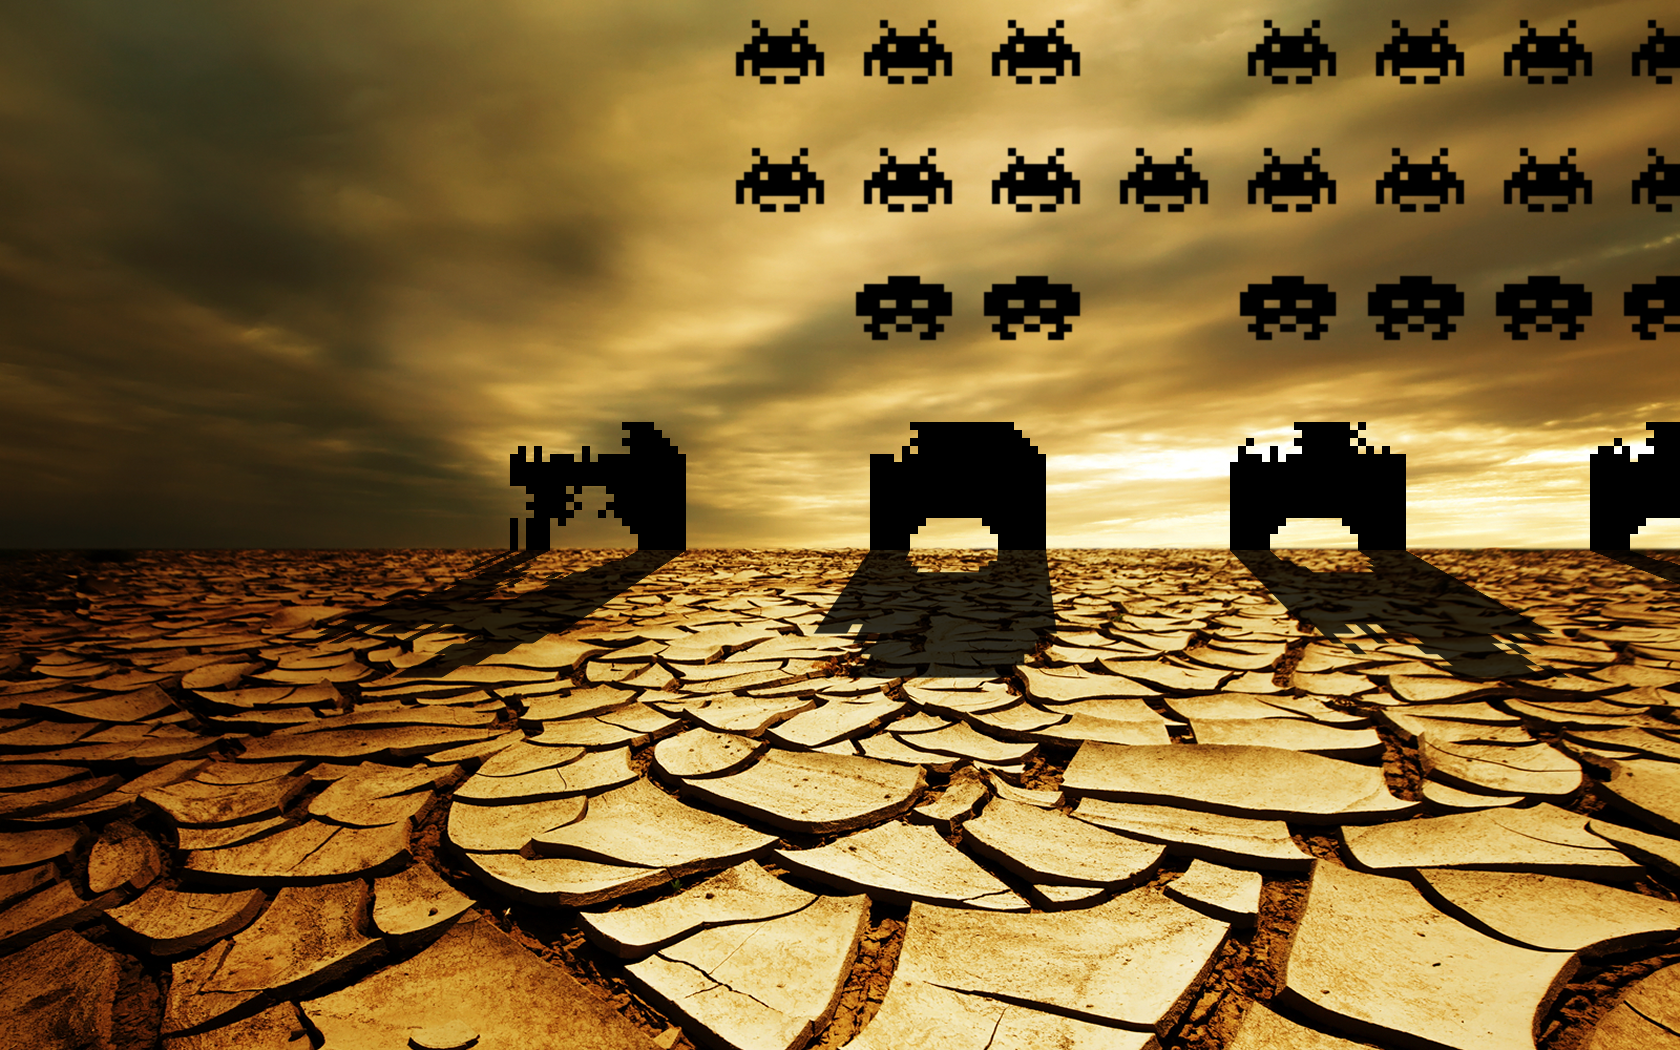 space, Invaders, Cracked, Classic, Atari, Desert, Landscapes Wallpaper